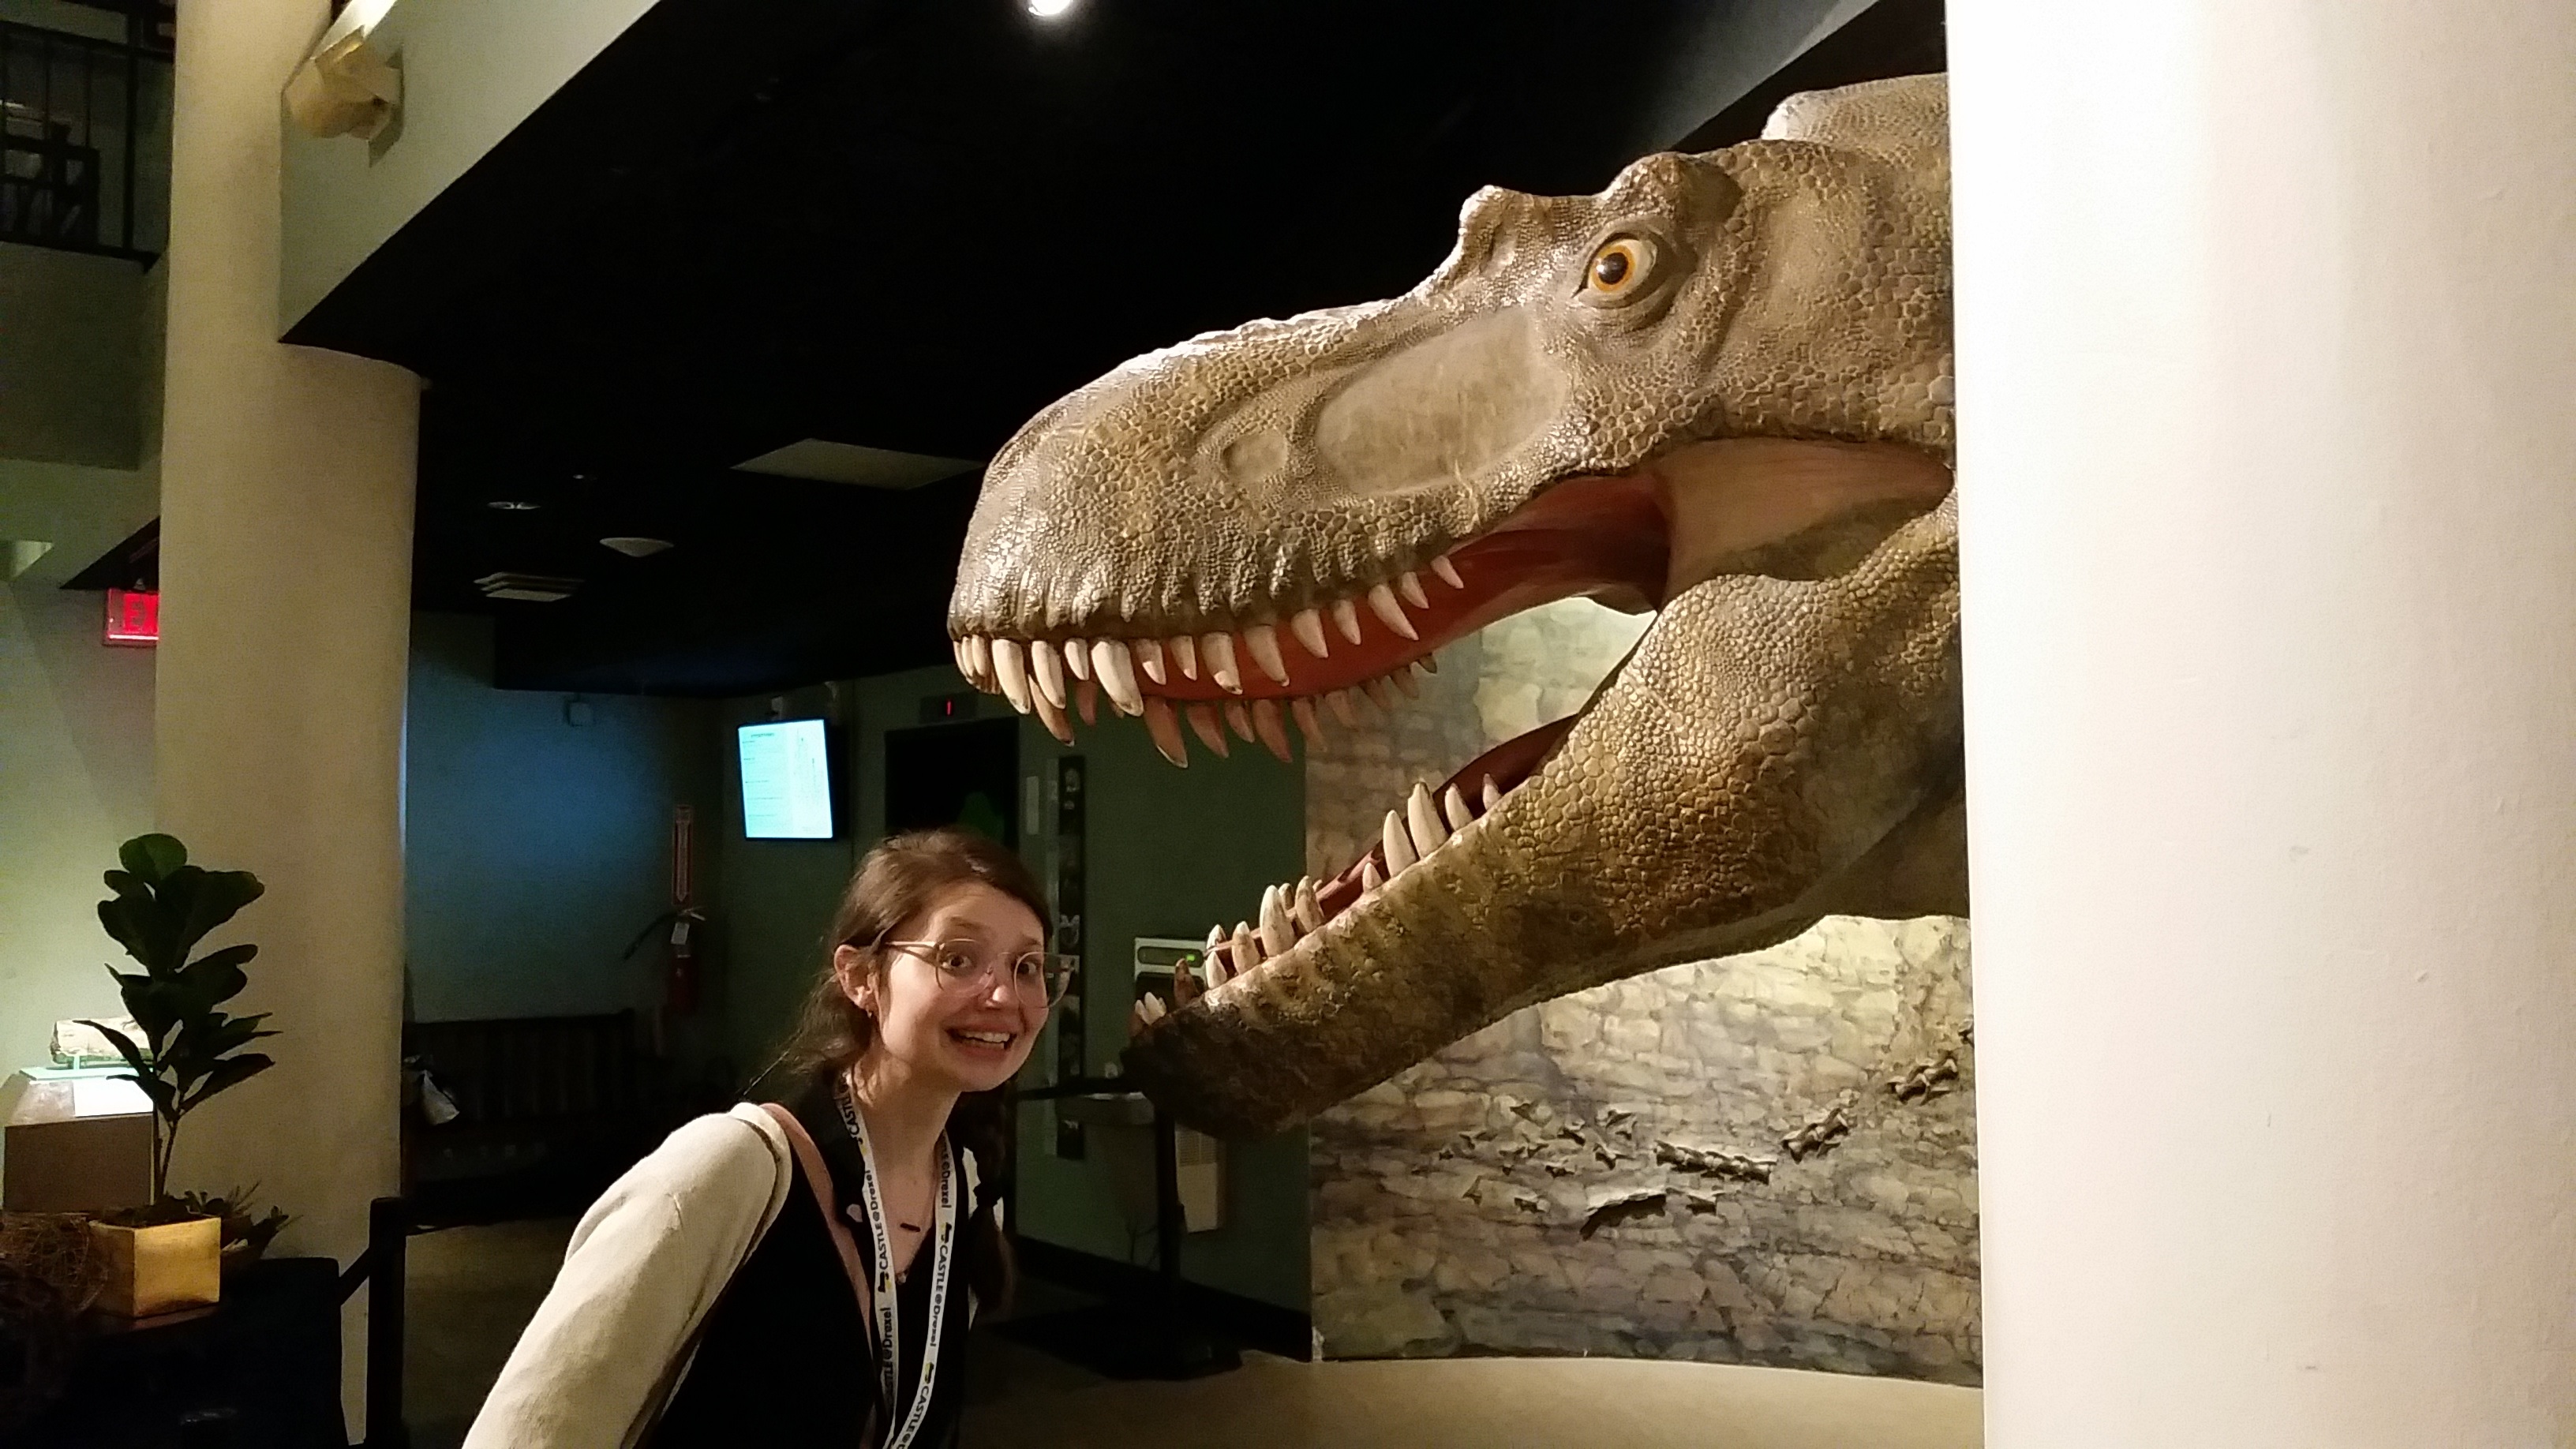 Cait standing beneath an open-mouth dinosaur model looking very scared.